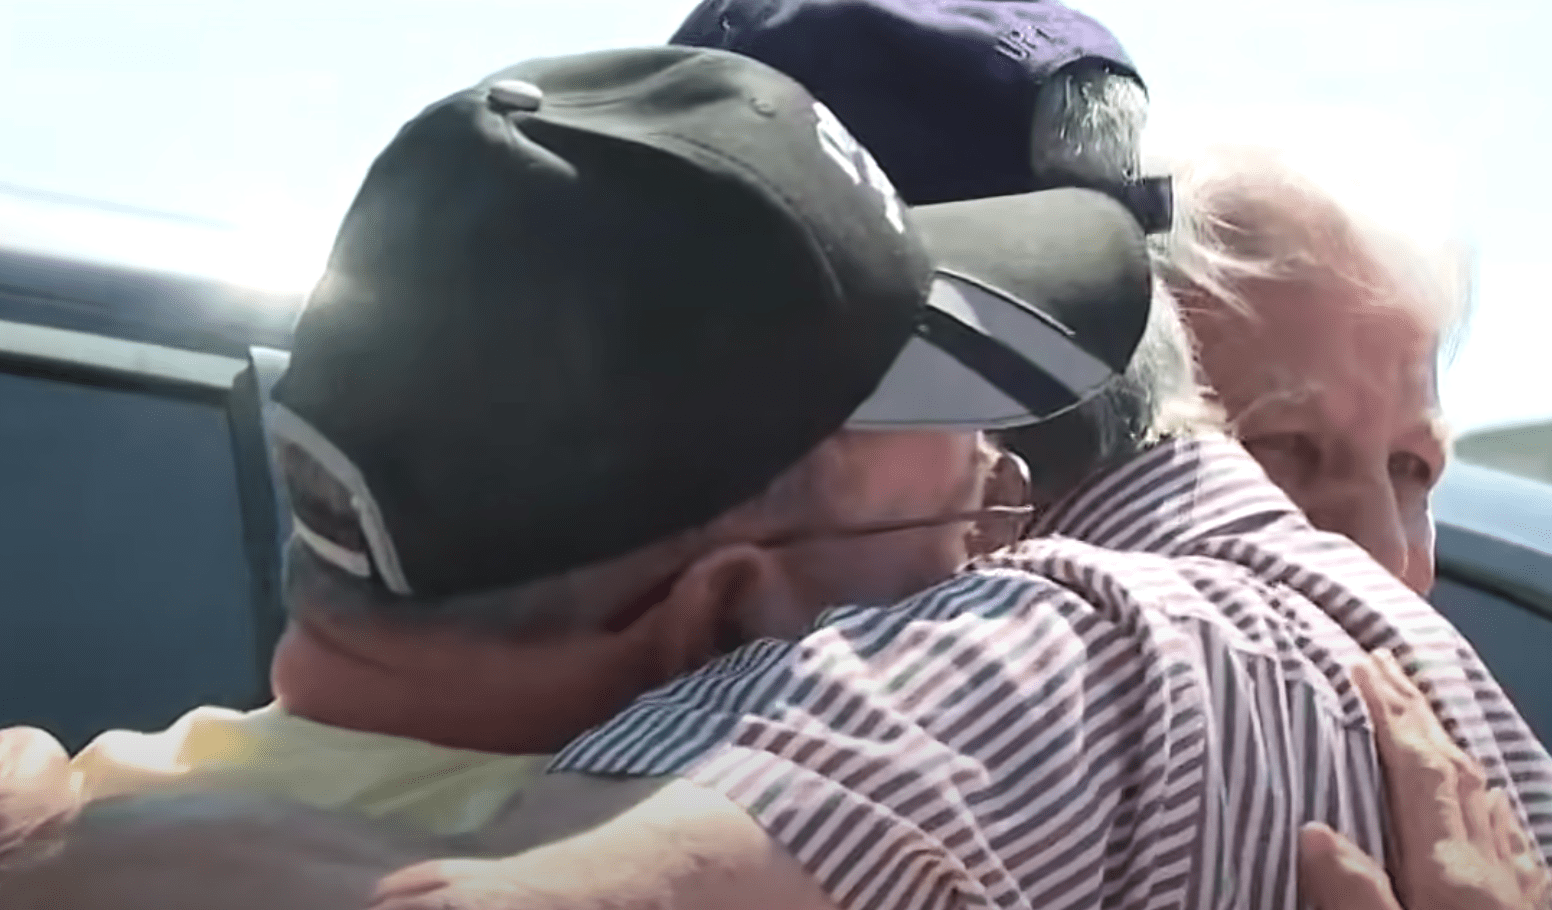 Veterans are tearful as they embrace each other during a surprise reunion. | Source: youtube.com/KTVB 